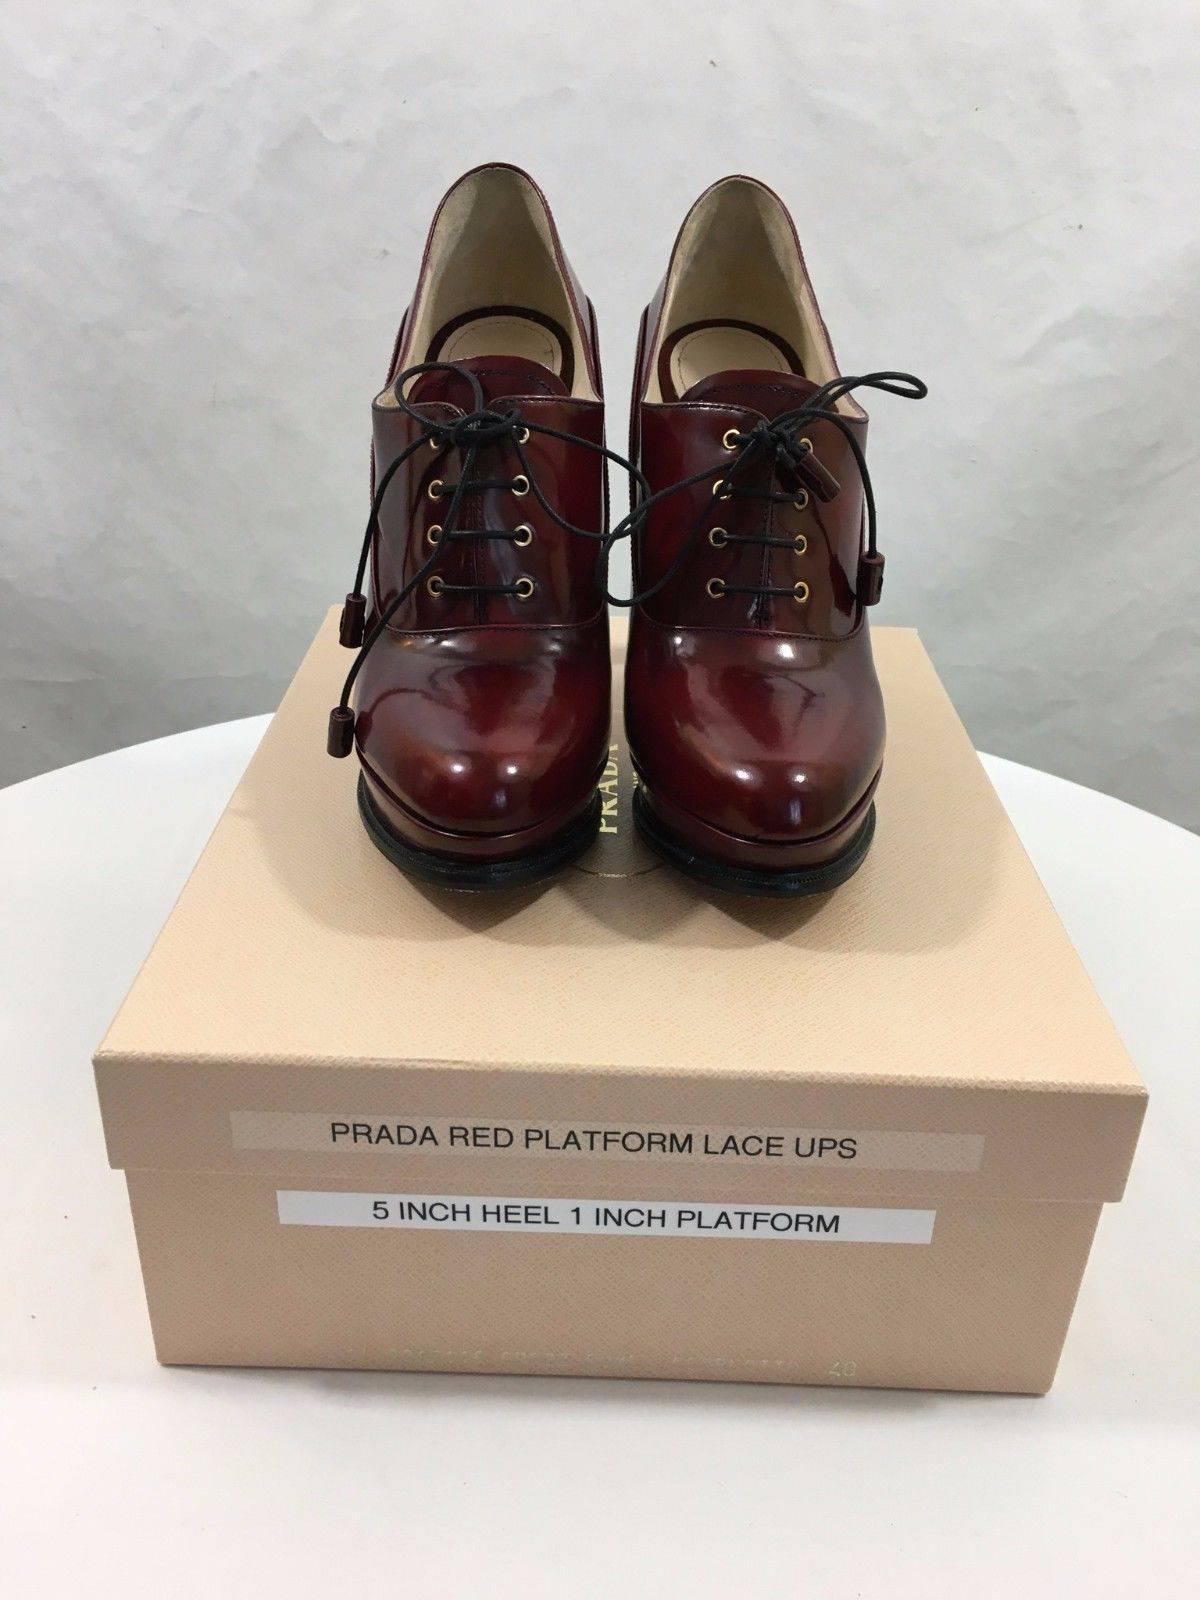 CONDITION - New! Never worn.

SKU - 805

SIZE - Euro 40 or US 9 to 9.5

COLOR - Burgundy 

MATERIAL - Patent Leather

COMES WITH - Original Box and Dust Bags ann Protective outer sole covers attached...a $50 value.